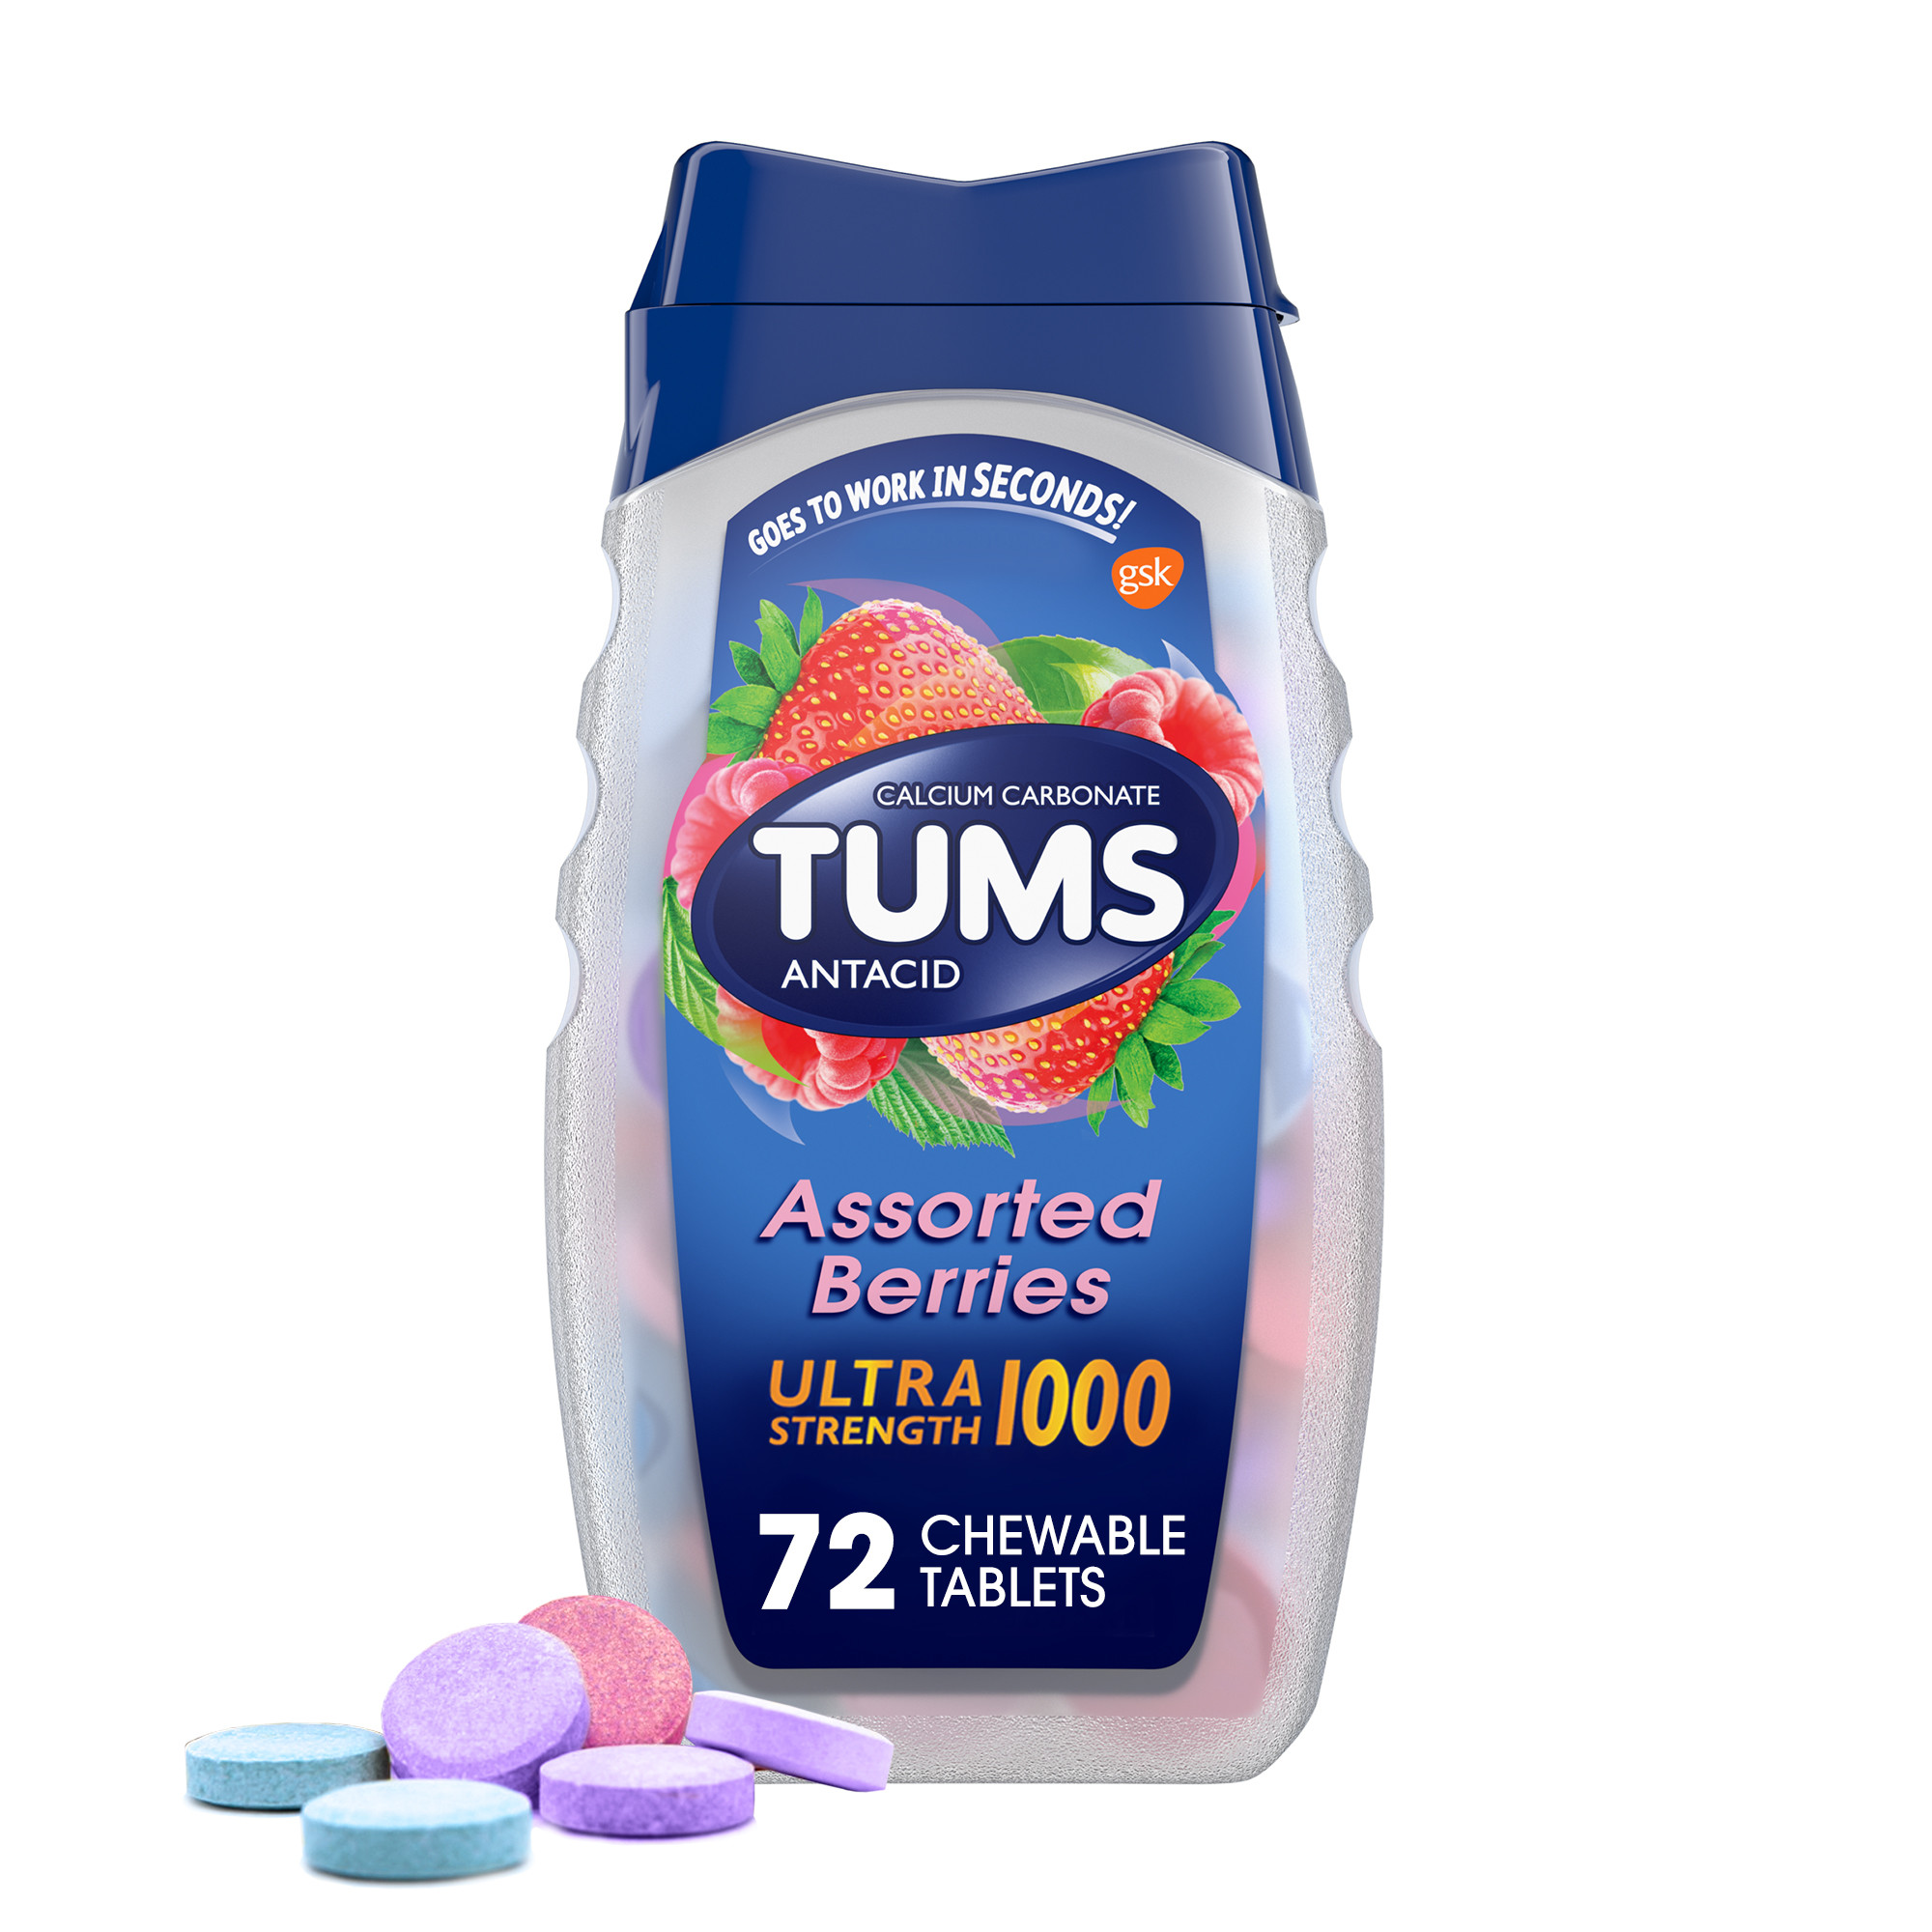 Tums Ultra Strength 1000 Assorted Berries Antacid Tablets, 72 Ct - image 1 of 11